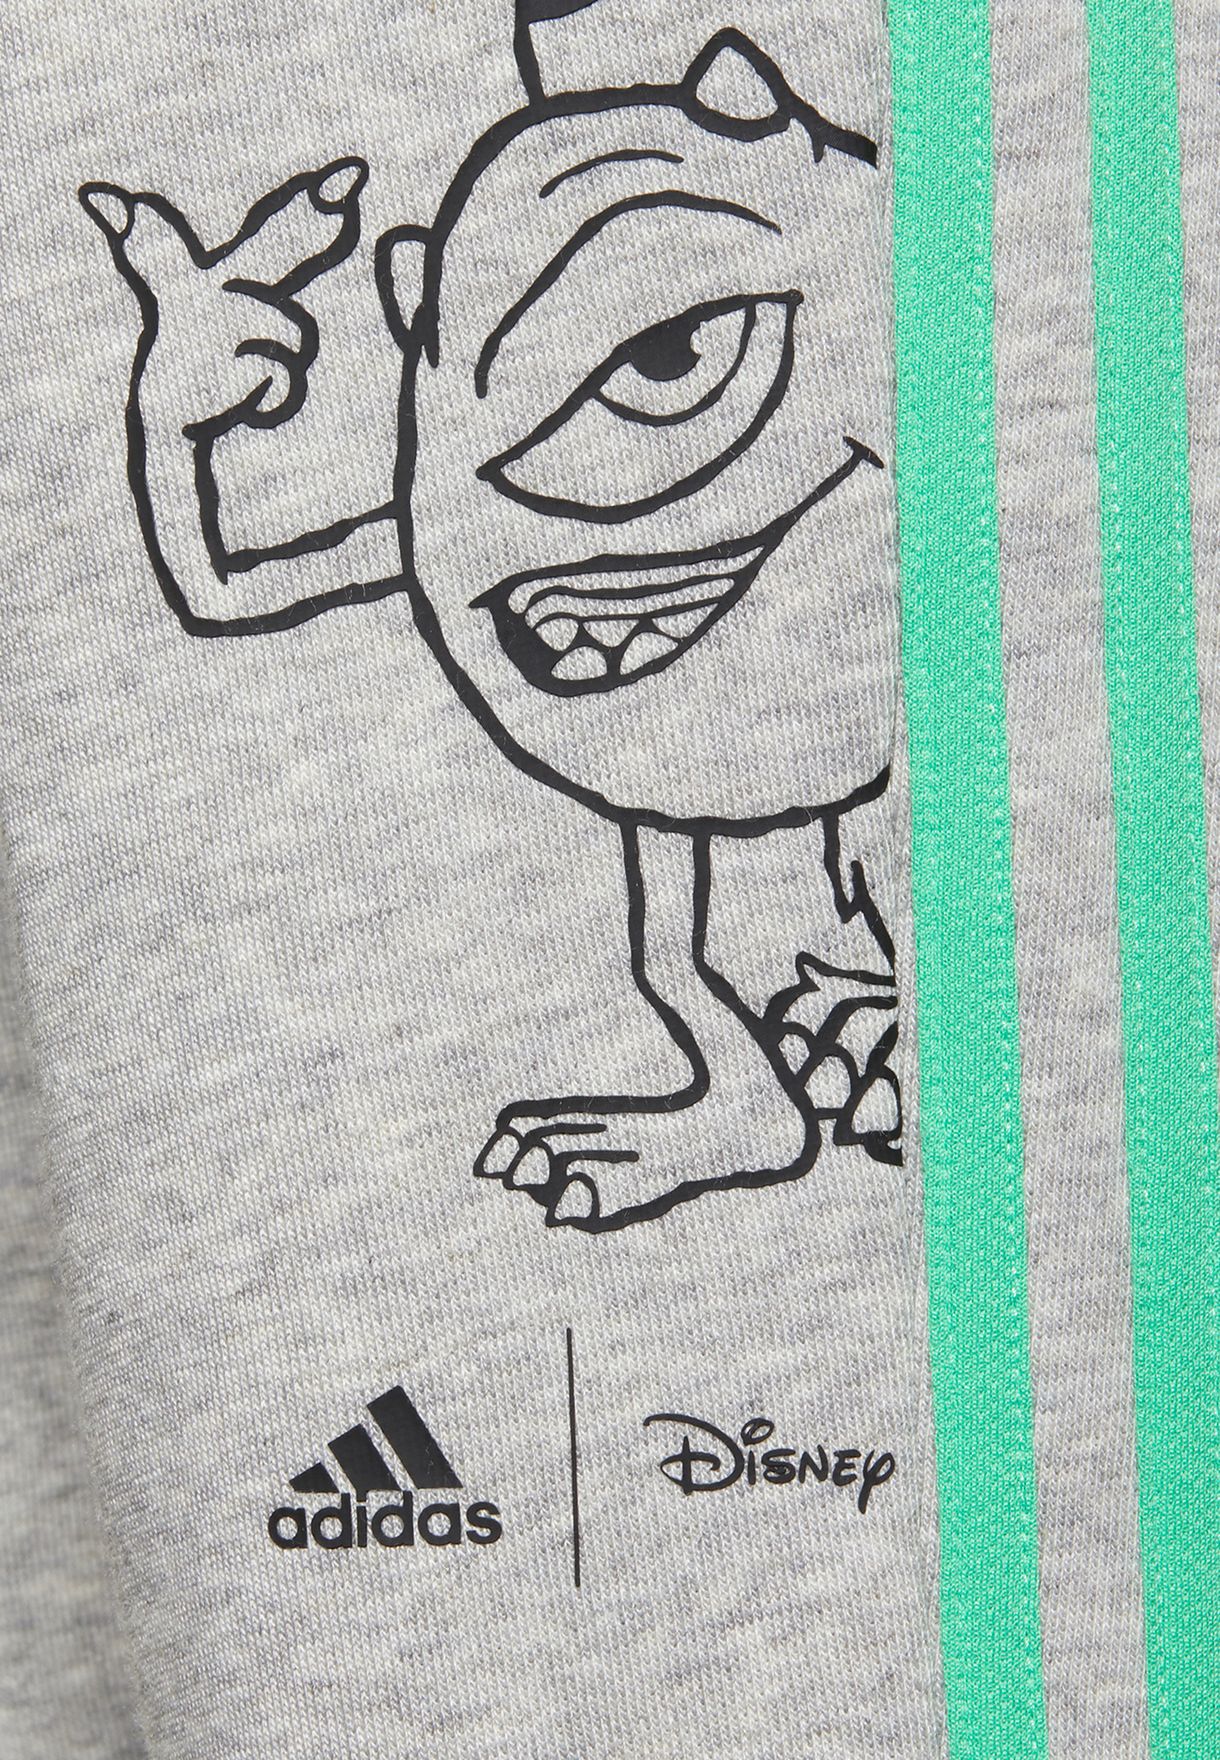 Youth Monster Sweatpants